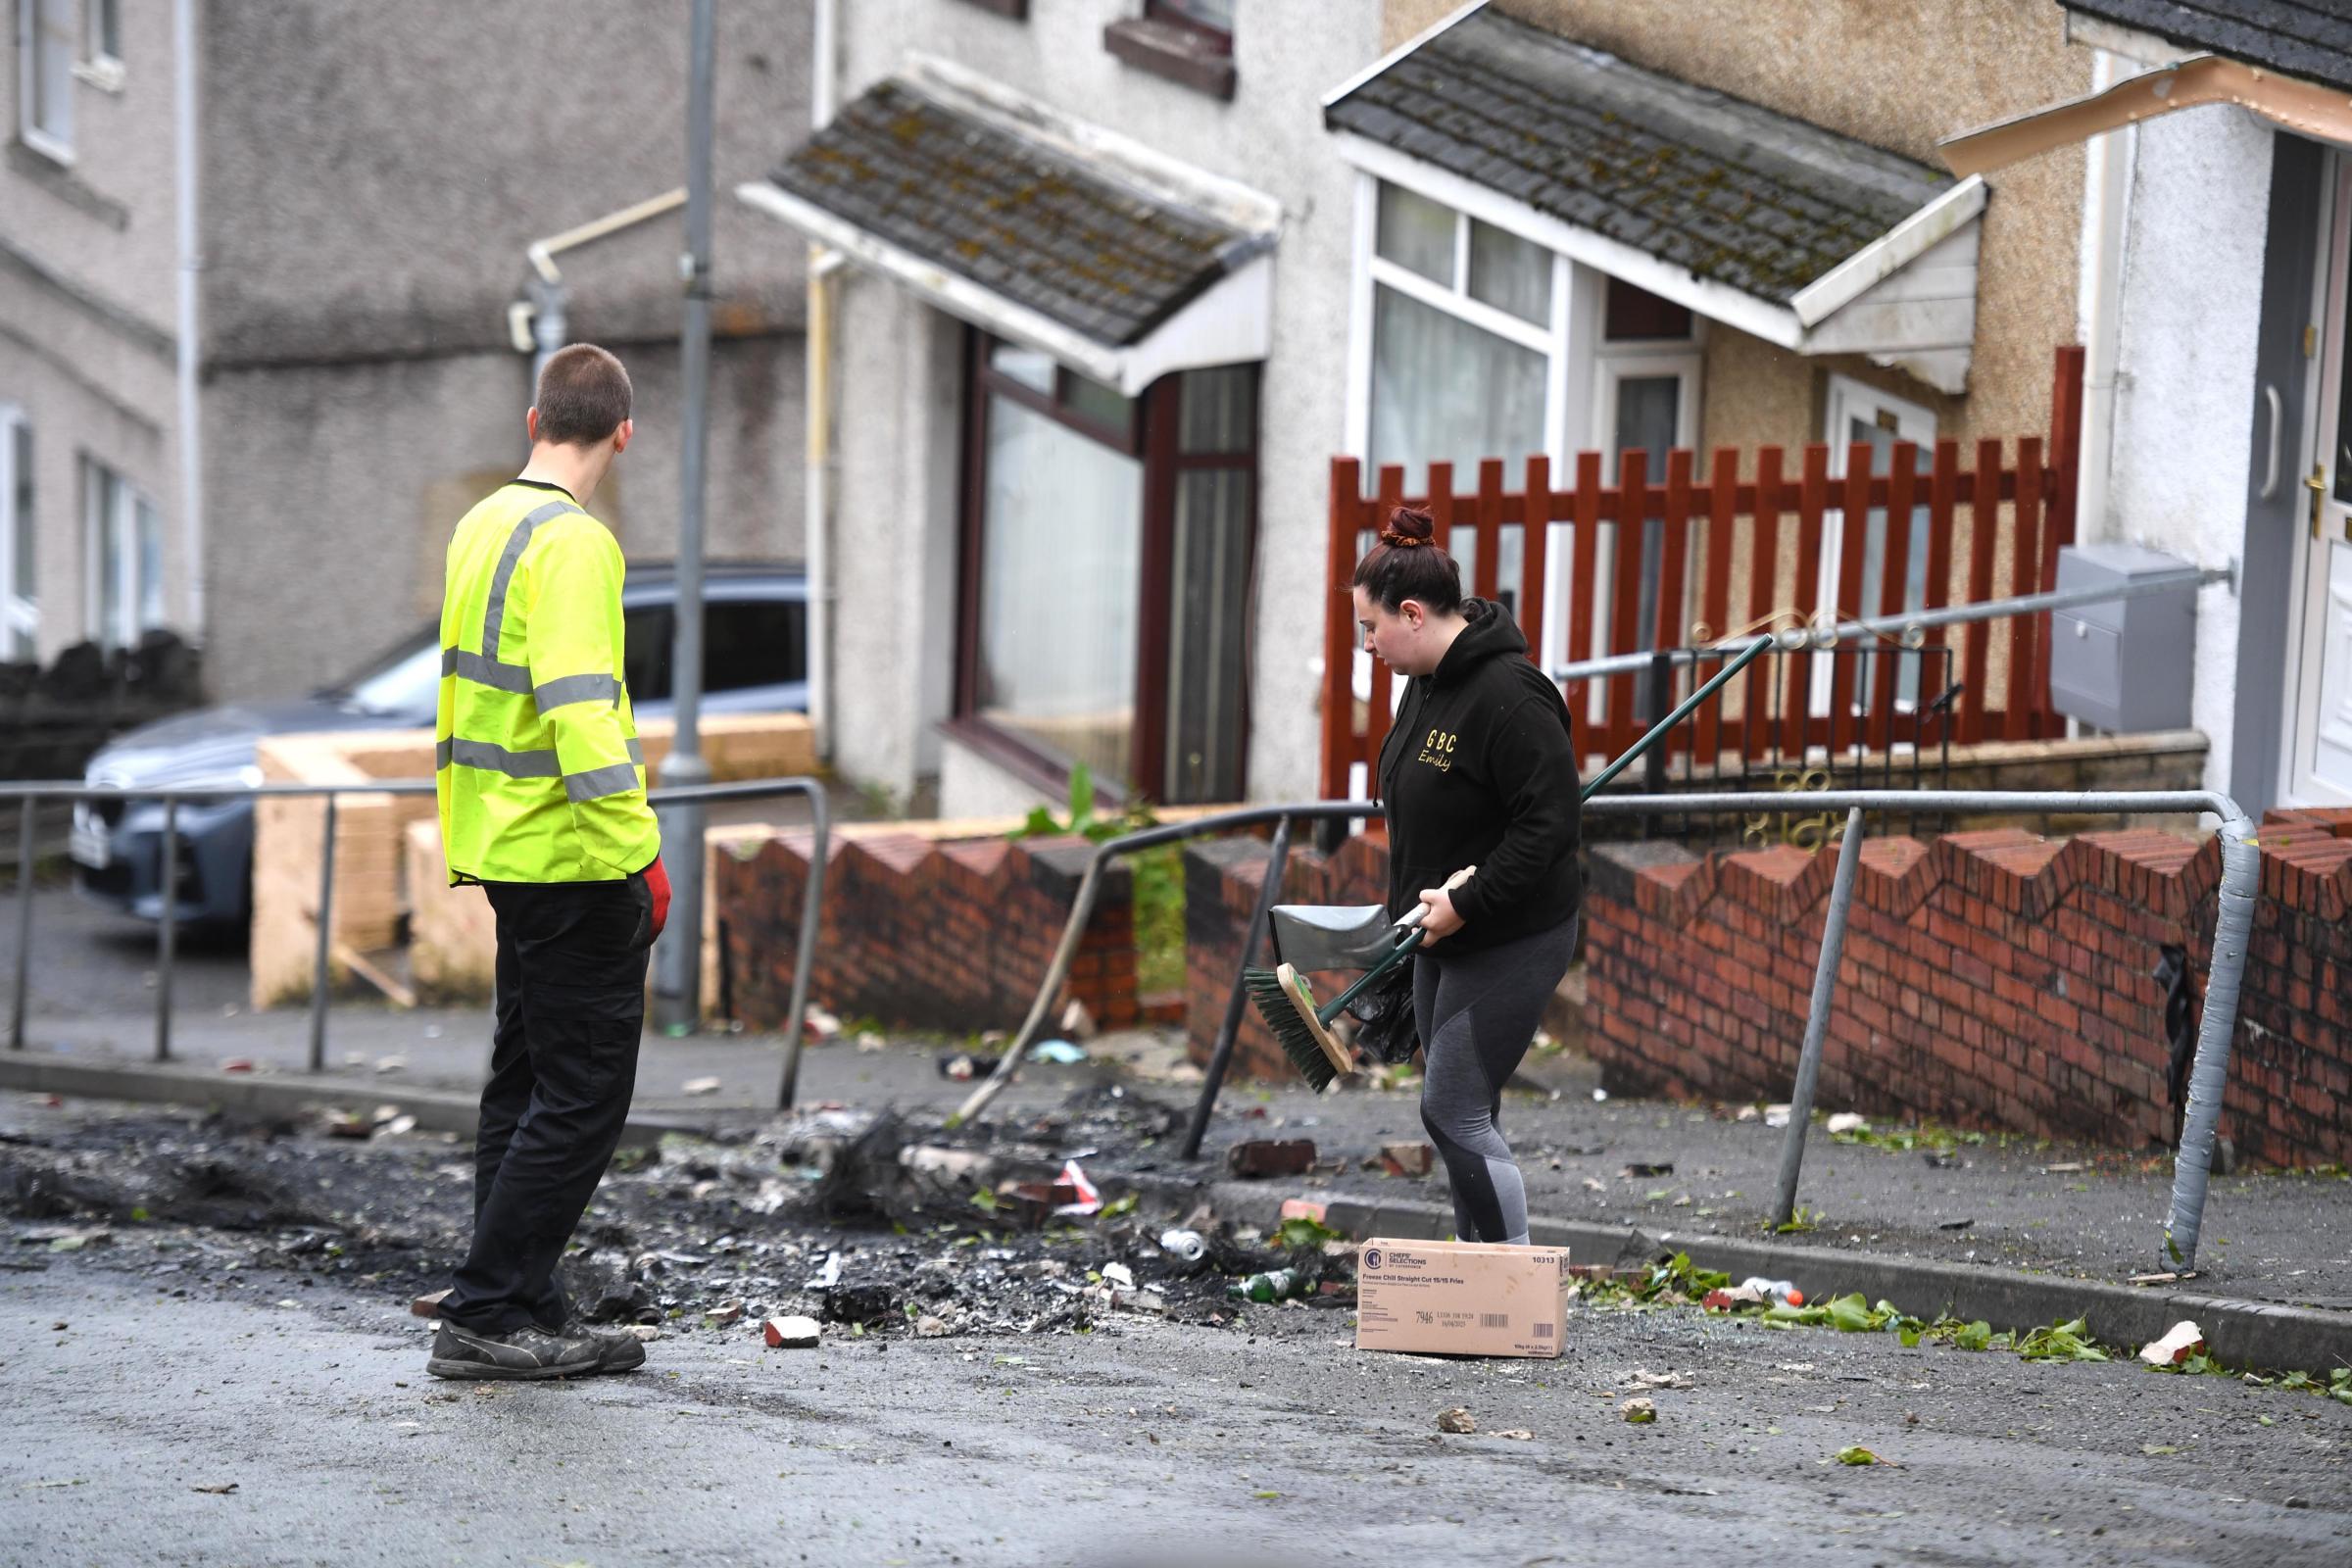 21.05.21 - Local residents and council workers clear up after cars were burnt out and windows smashed during the violence and riots in the Mayhill area of Swansea, South Wales last night.